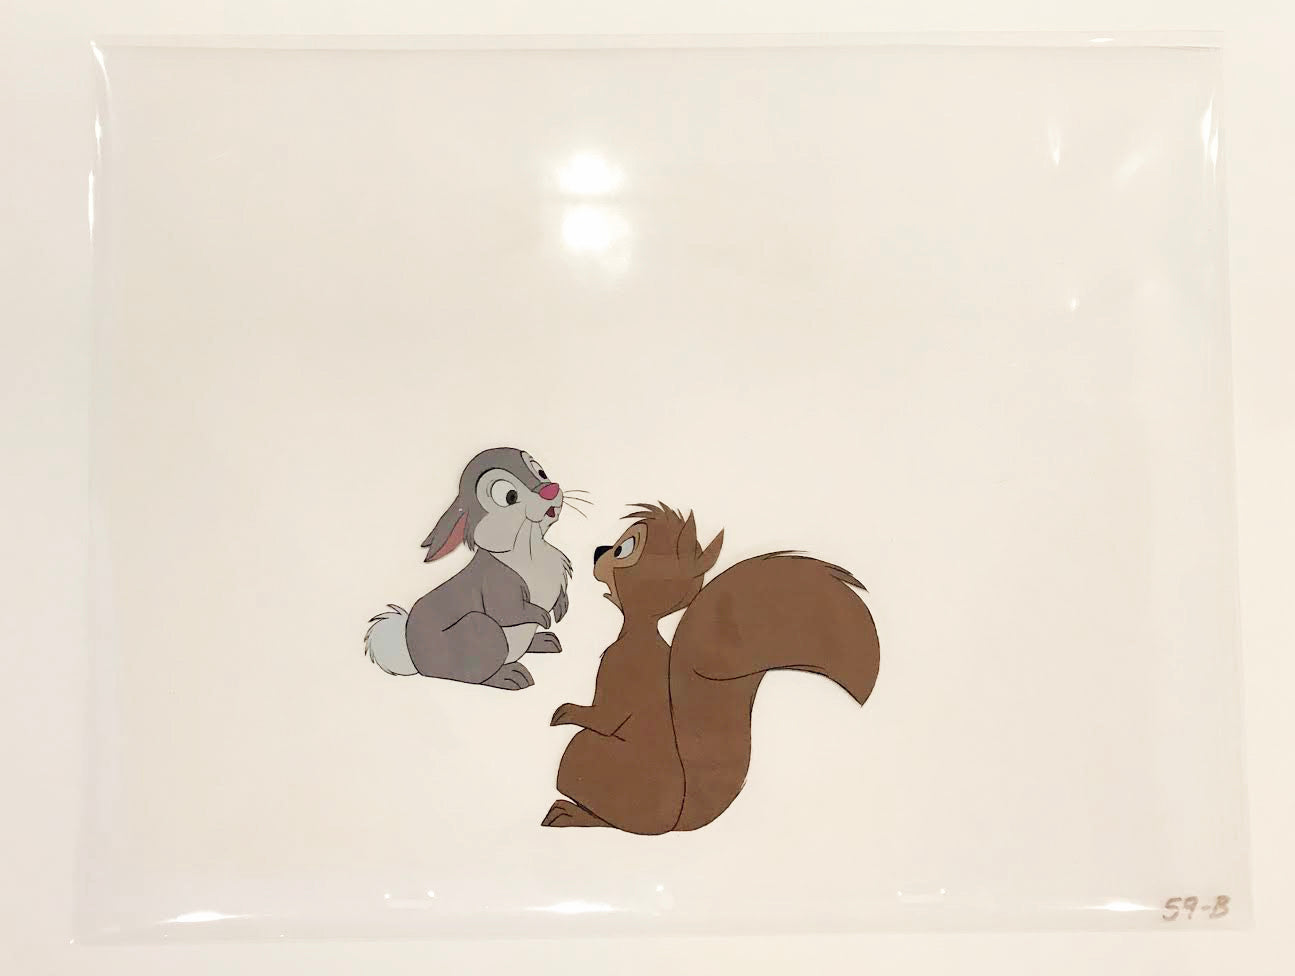 Original Walt Disney Production Cel from The Sword in the Stone featuring Squirrel and Rabbit